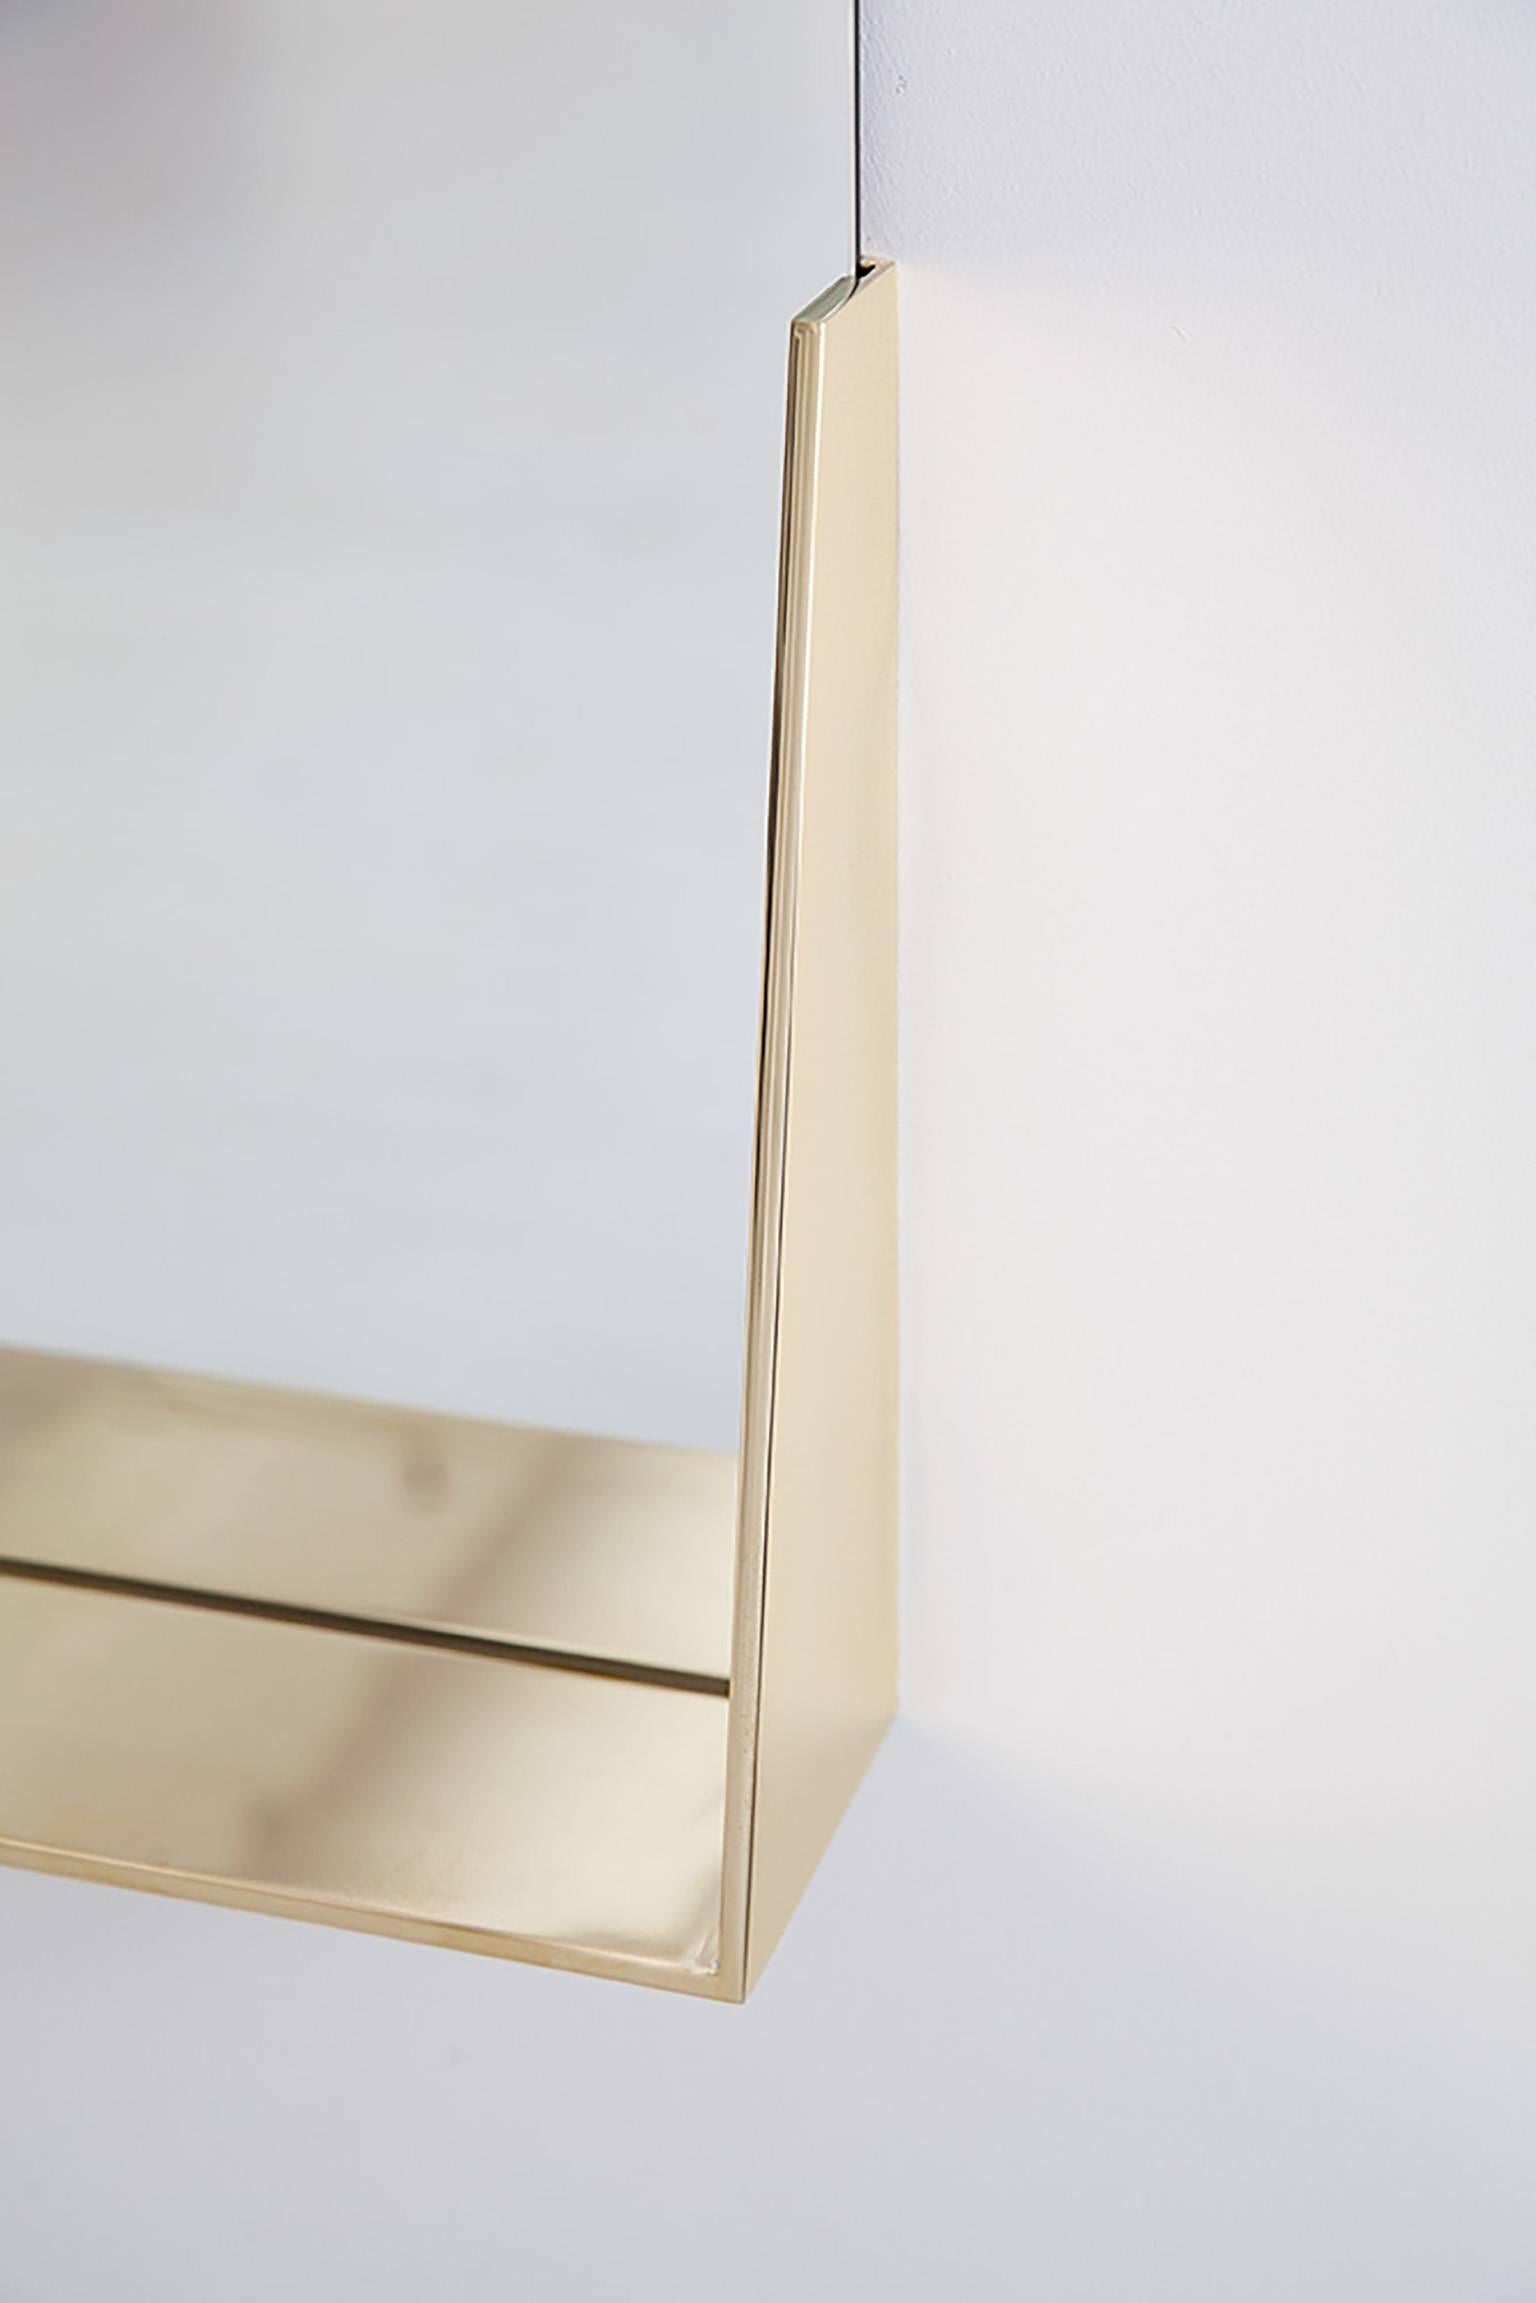 The Feehan Mirror is crafted in collaboration with our team of highly skilled local fabricators, and is constructed of mirrored glass and brass.